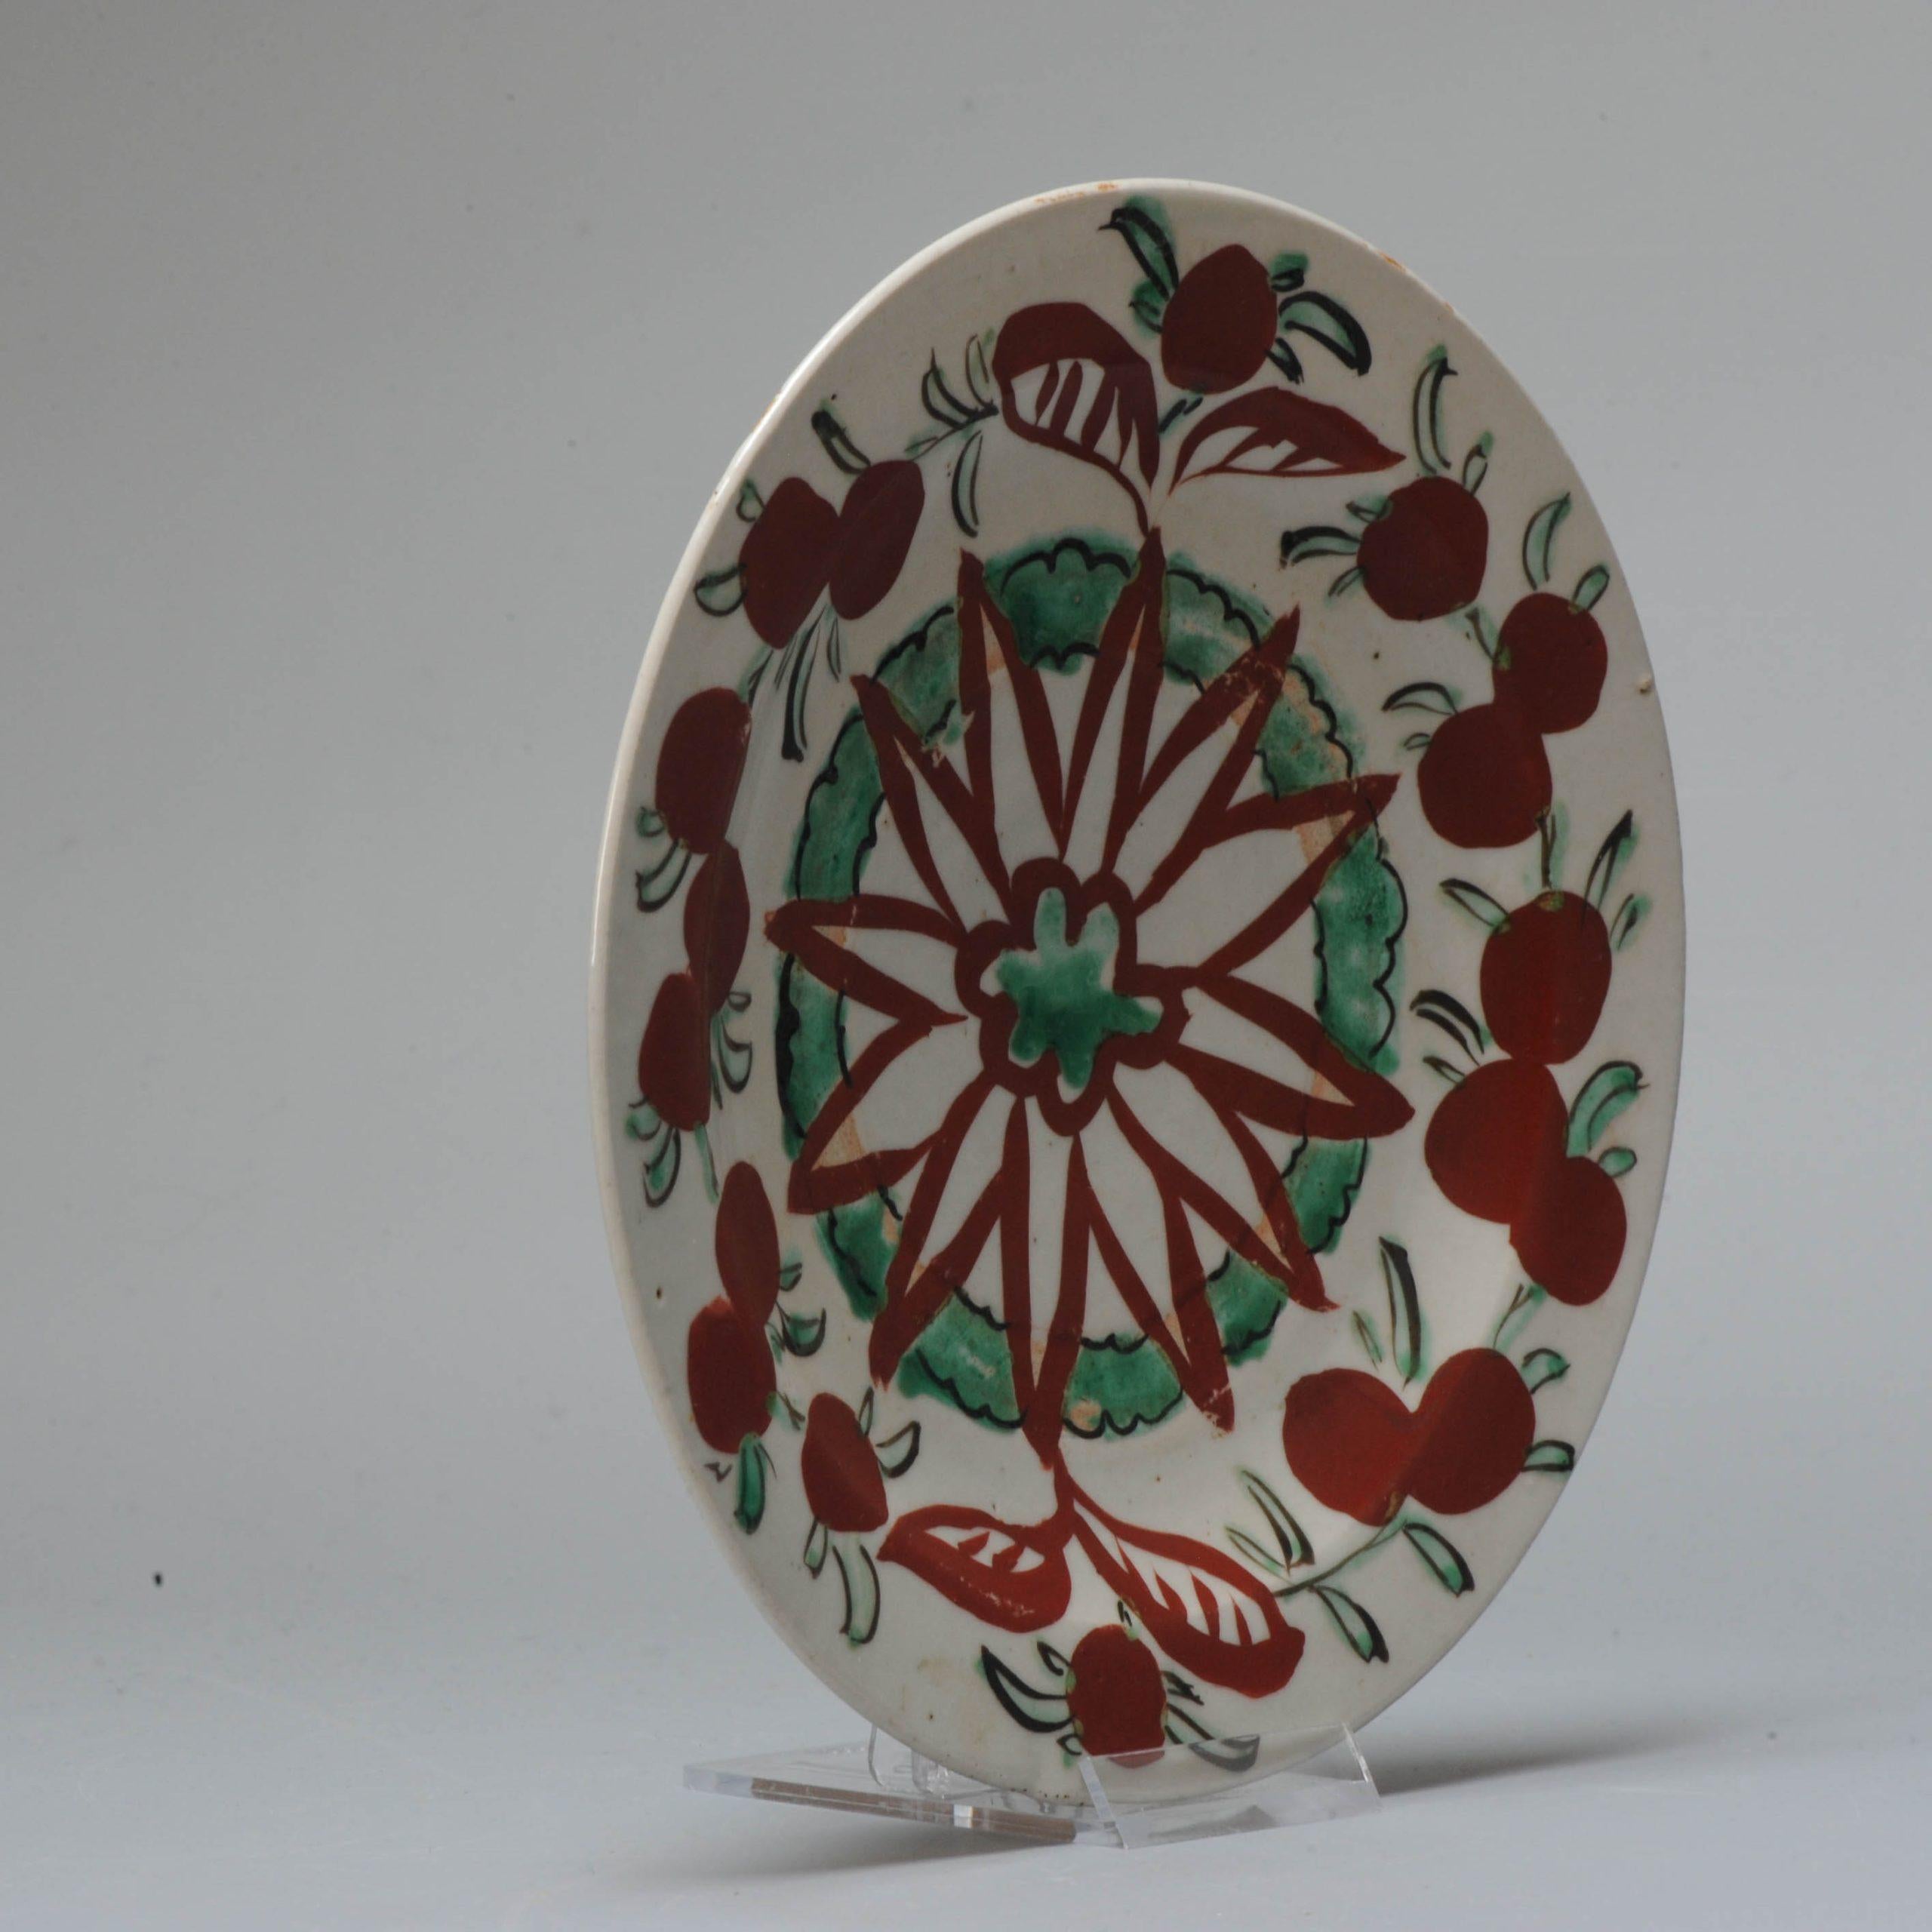 A rare piece of Japanese porcelain with thick enamel in Red and Green. Flower and fruits.

Additional information:
Material: Porcelain & Pottery
Region of Origin: Japan
Period: 17th century, 18th century Edo Period (1603–1867)
Condition: